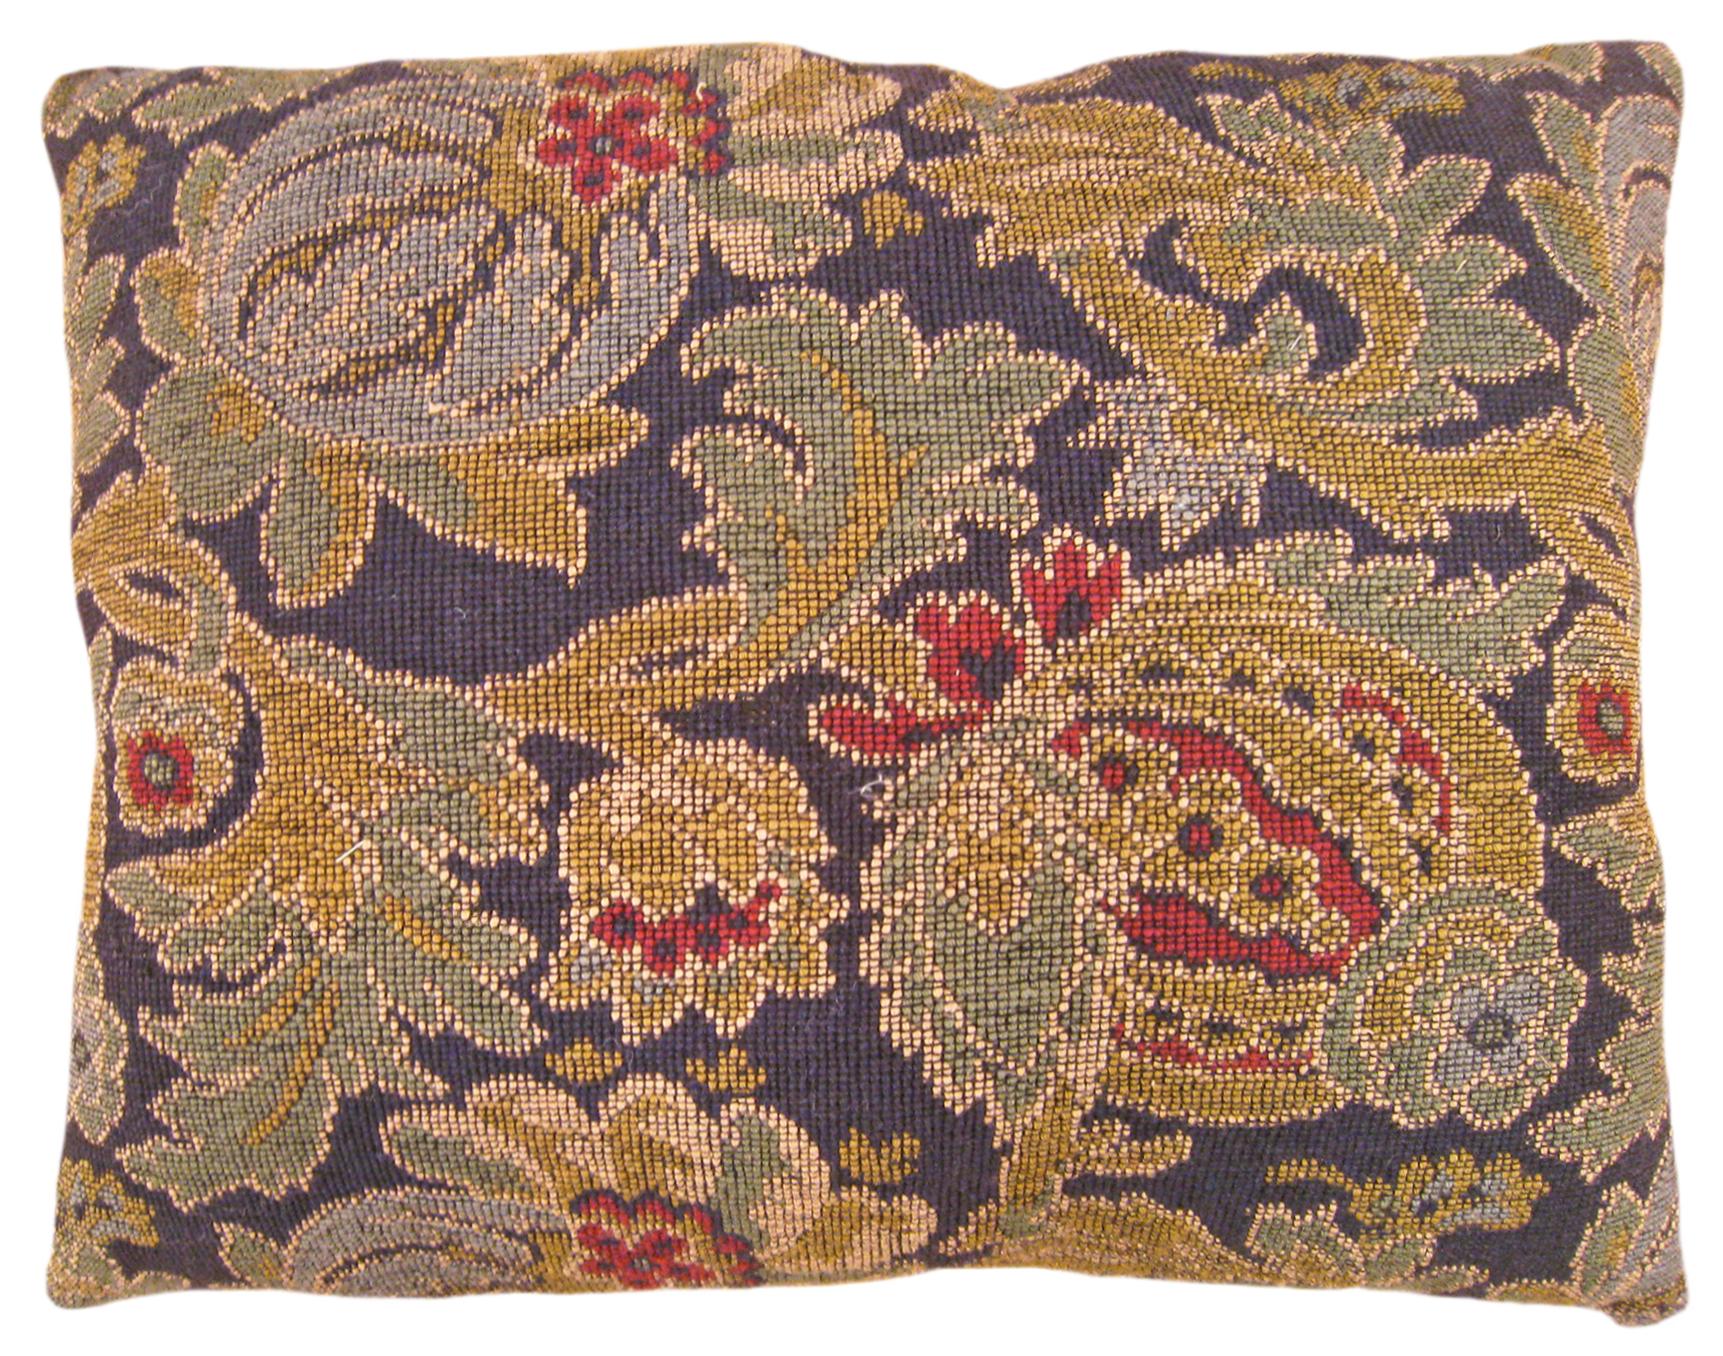 Early 20th Century Pair of Decorative Antique Jacquard Tapestry Pillows with Floral Elements For Sale